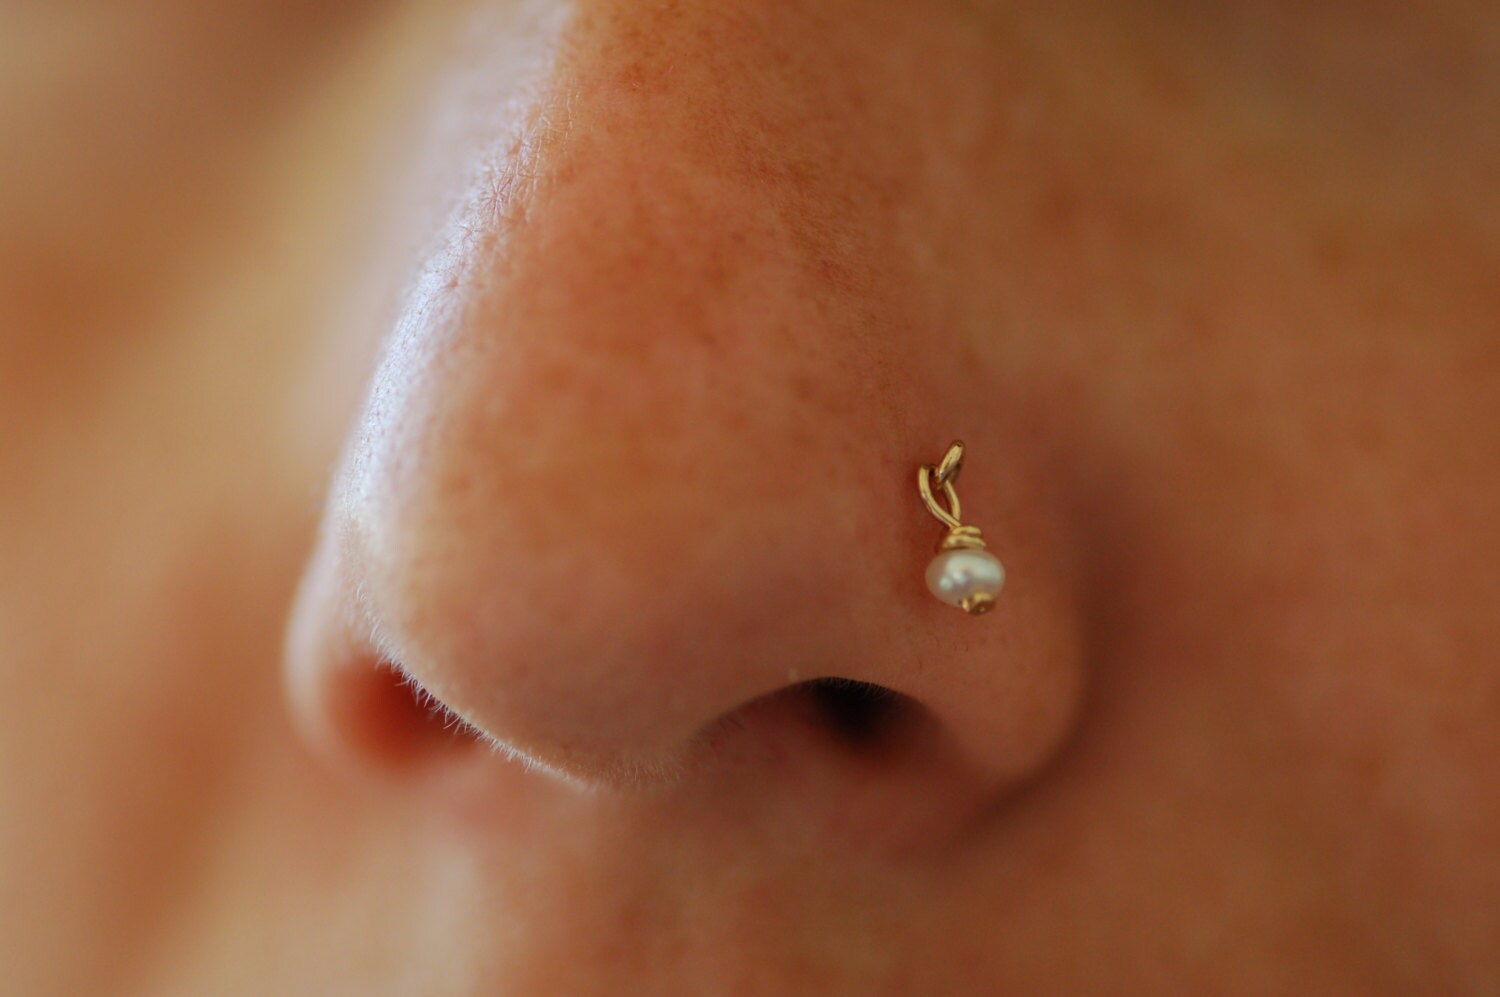 3mm Pearl Nose Ring Stud Gold Nose Piercing Nose Stud Helix Earring Stud  Tragus Jewelry Cartilage Hoop Conch Piercing 20g - Etsy